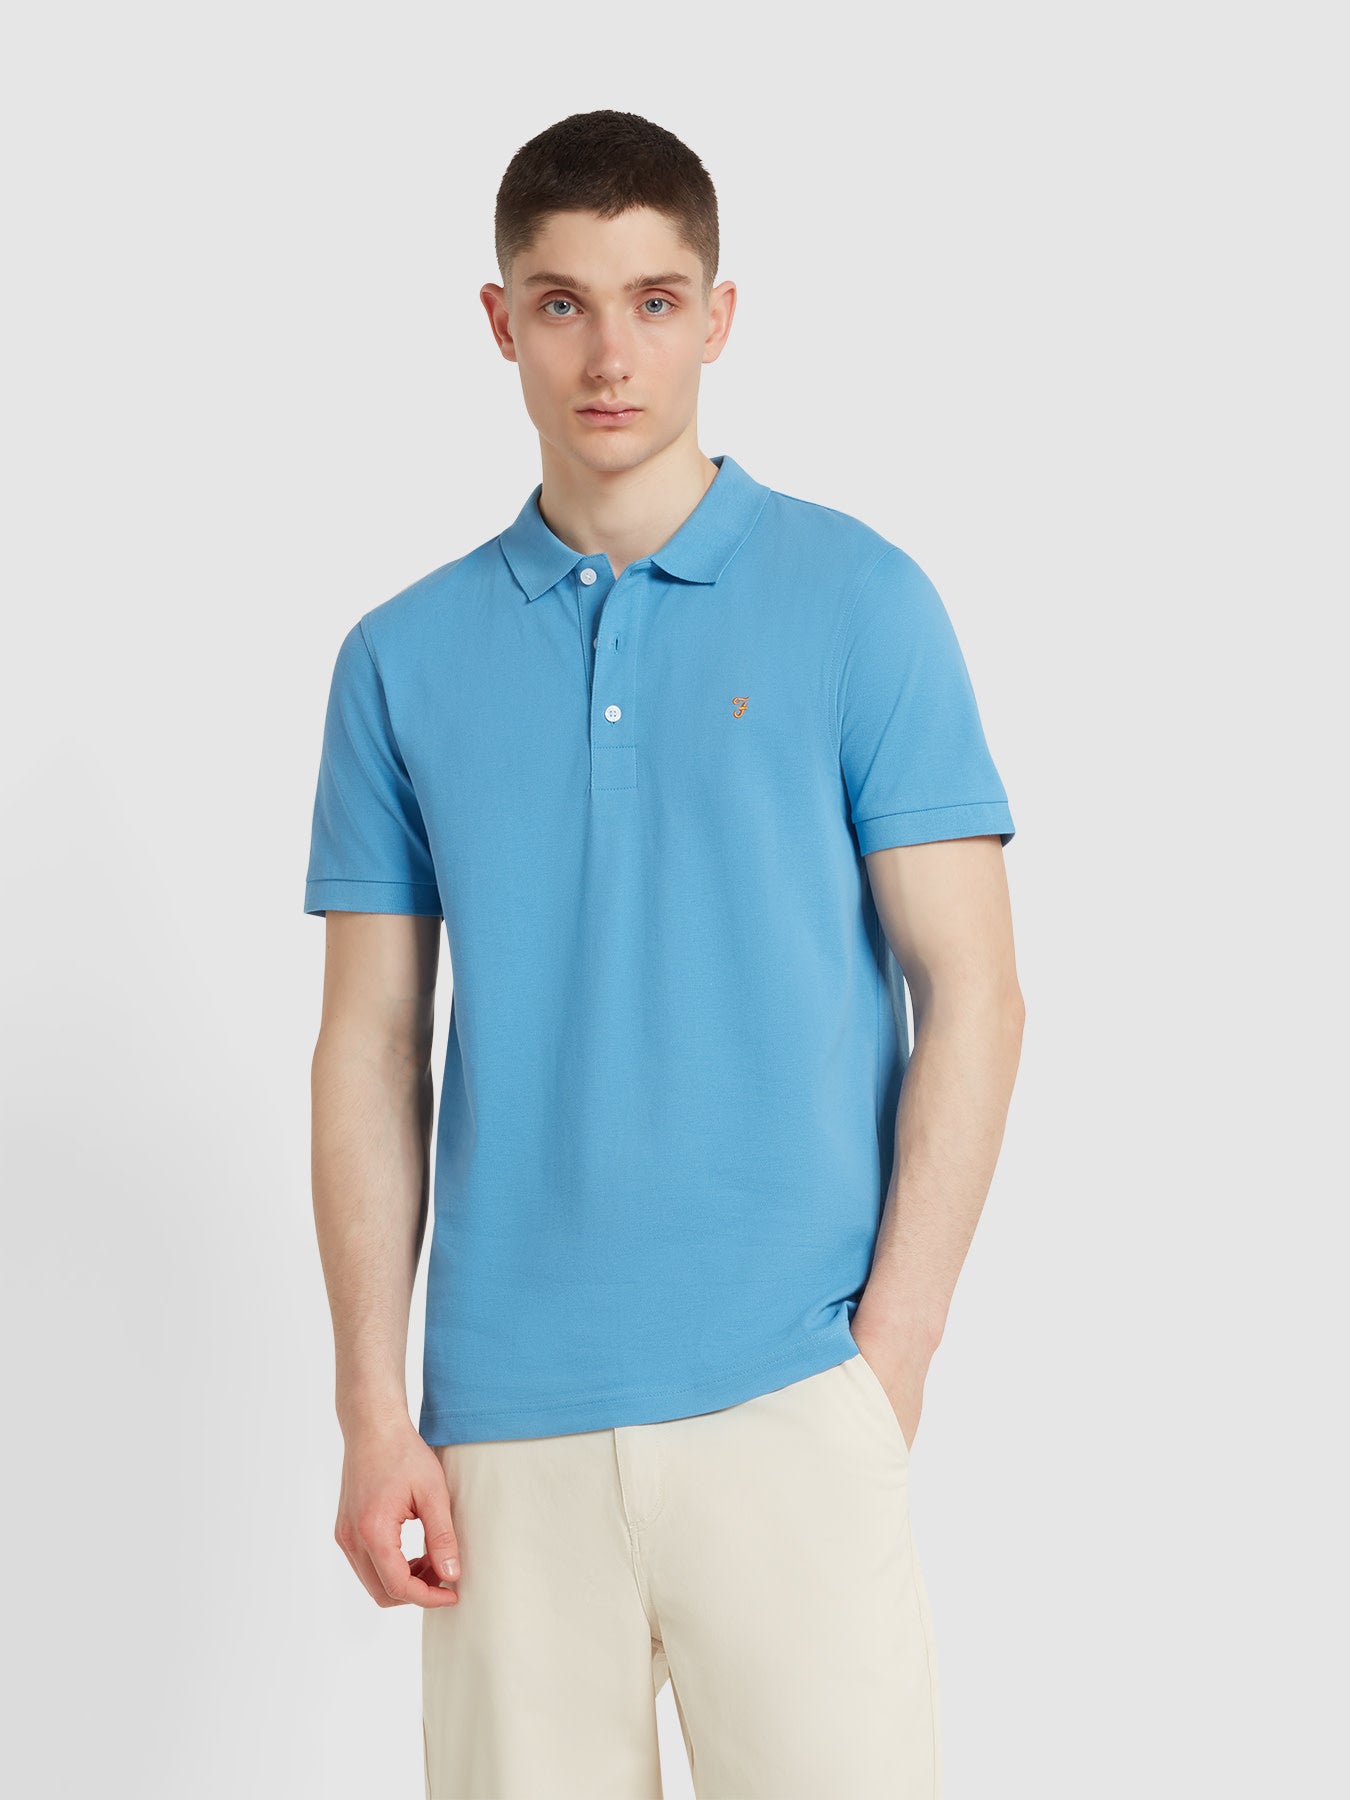 View Blanes Organic Cotton Short Sleeve Polo Shirt In Arctic Blue information